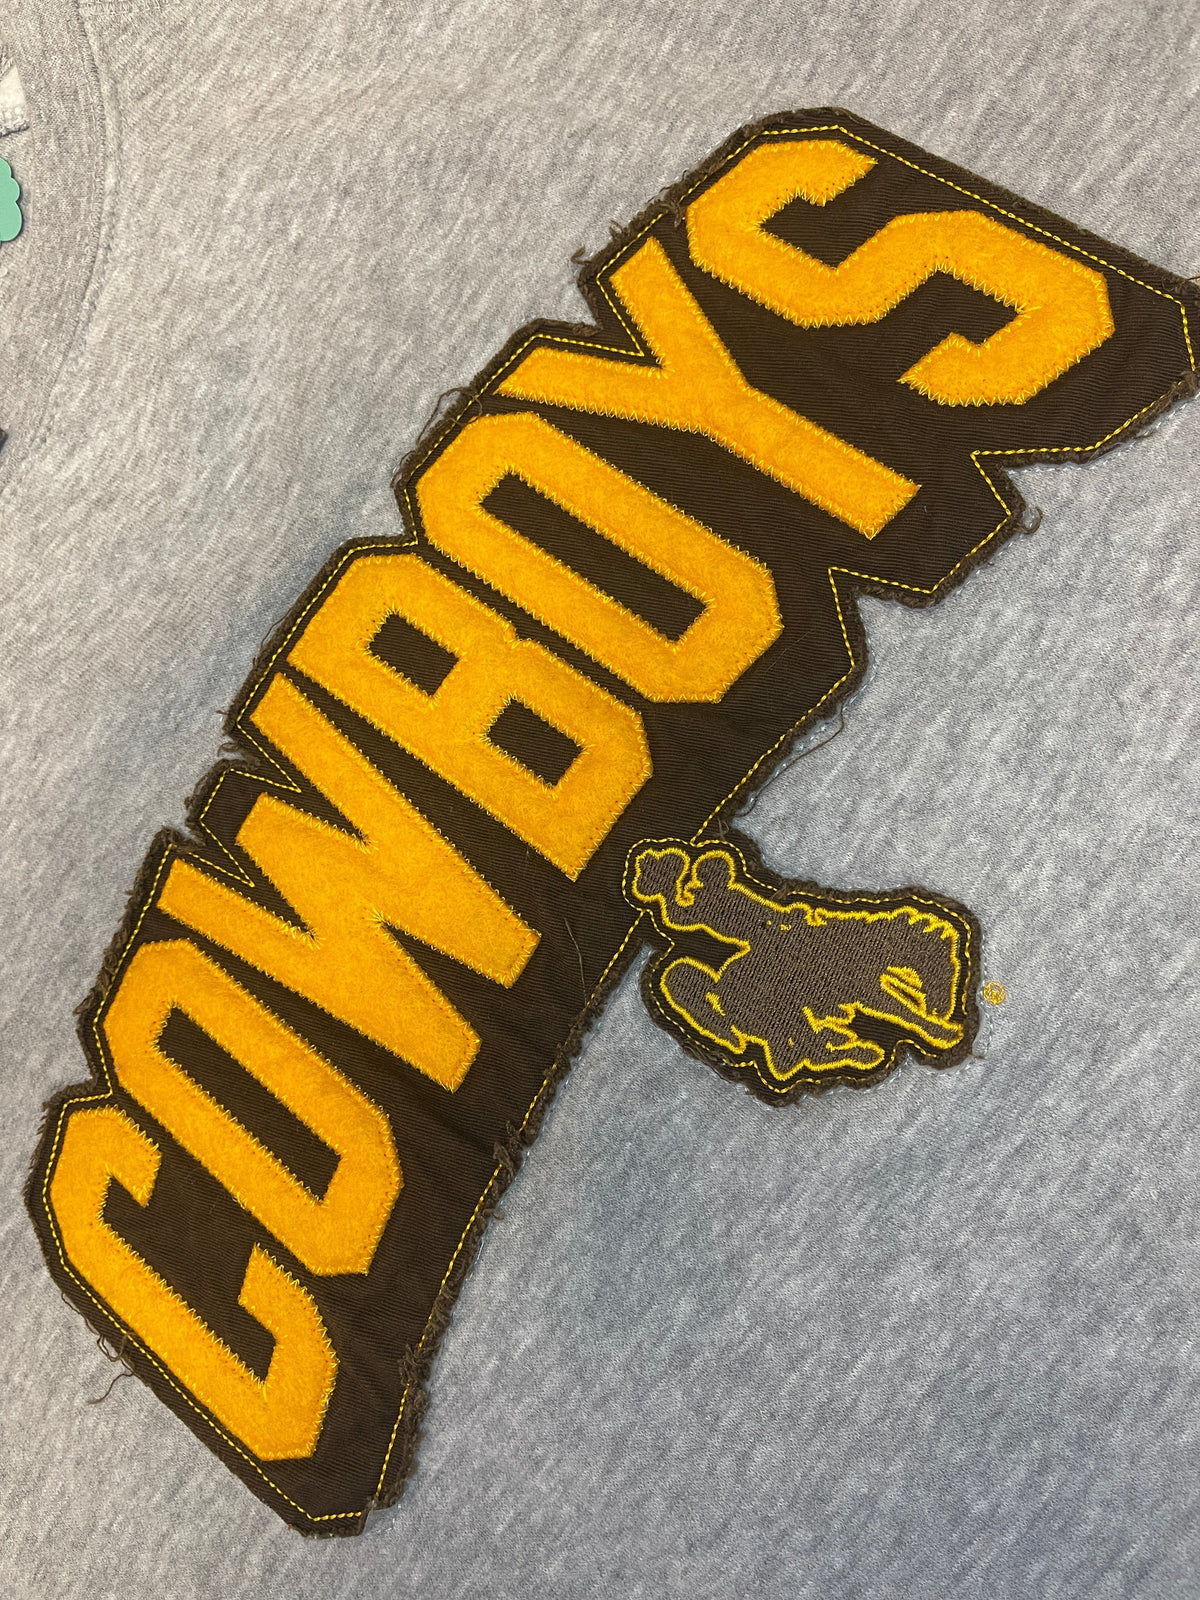 NCAA Wyoming Cowboys Stitched Pullover Sweatshirt Men's X-Large